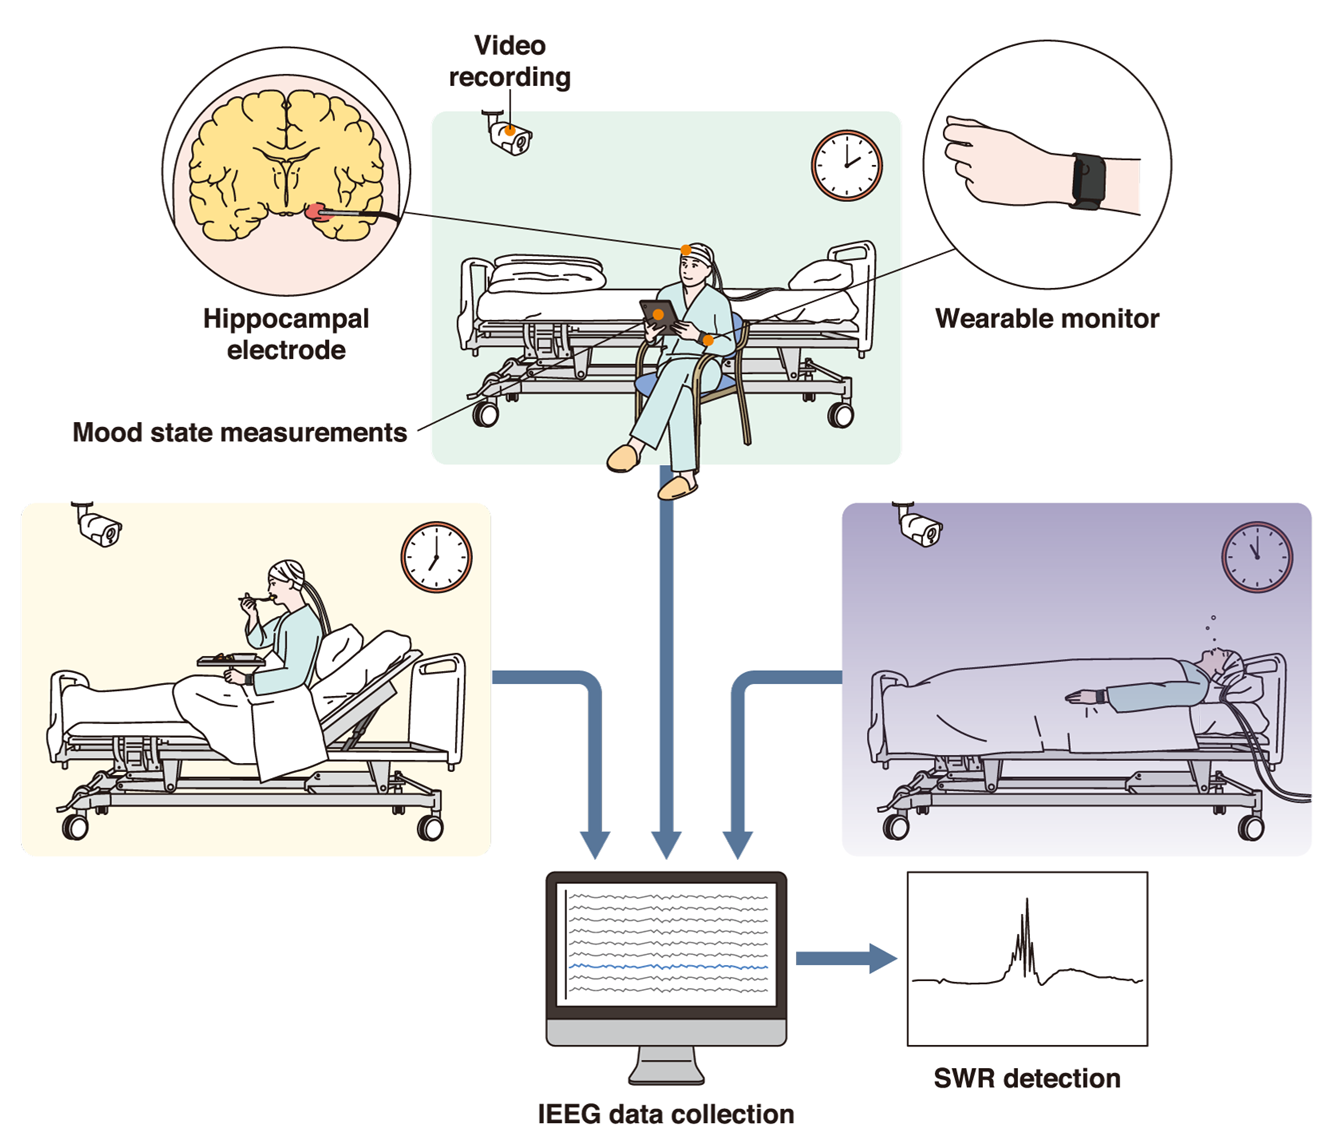 cartoon diagram showing how the study data was collected; epilepsy patients have electrodes implanted into their hippocampi and wear a monitoring device, they are also video recorded while they complete regular questionnaires about their mood; EEG data is collected and analyzed to look for sharp-wave ripple patterns